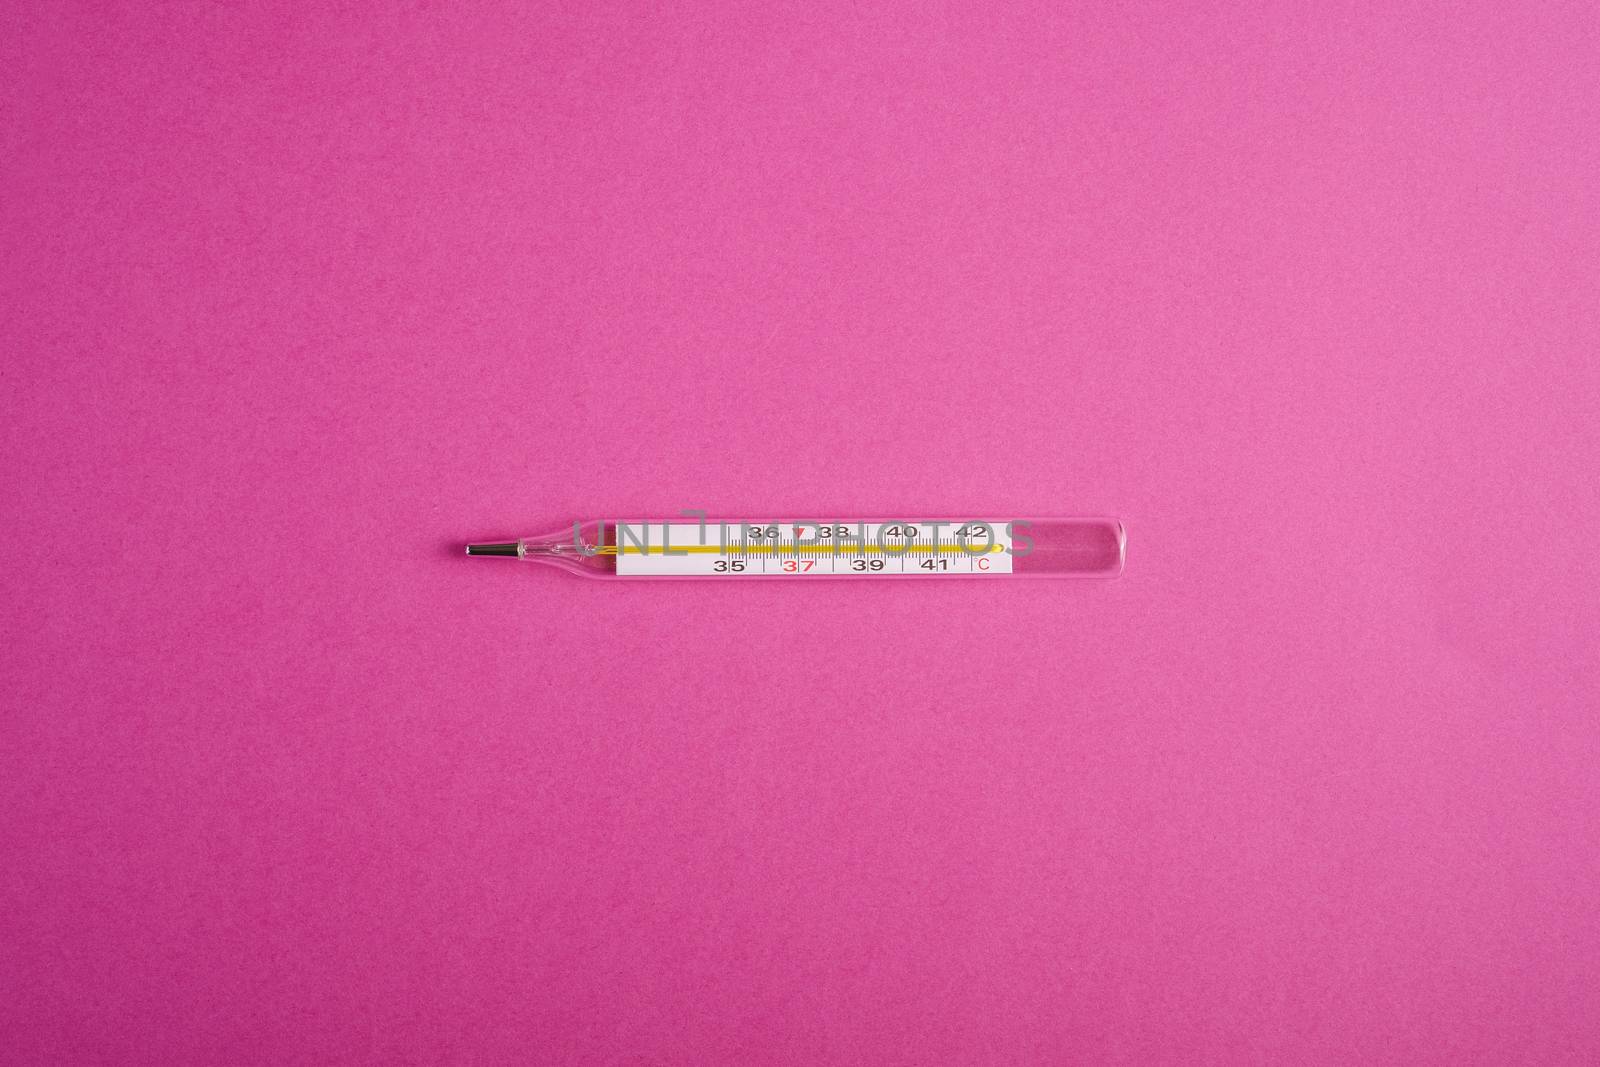 Analog thermometer on pink purple background, healthcare medical concept, antibiotics and cure, top view copy space